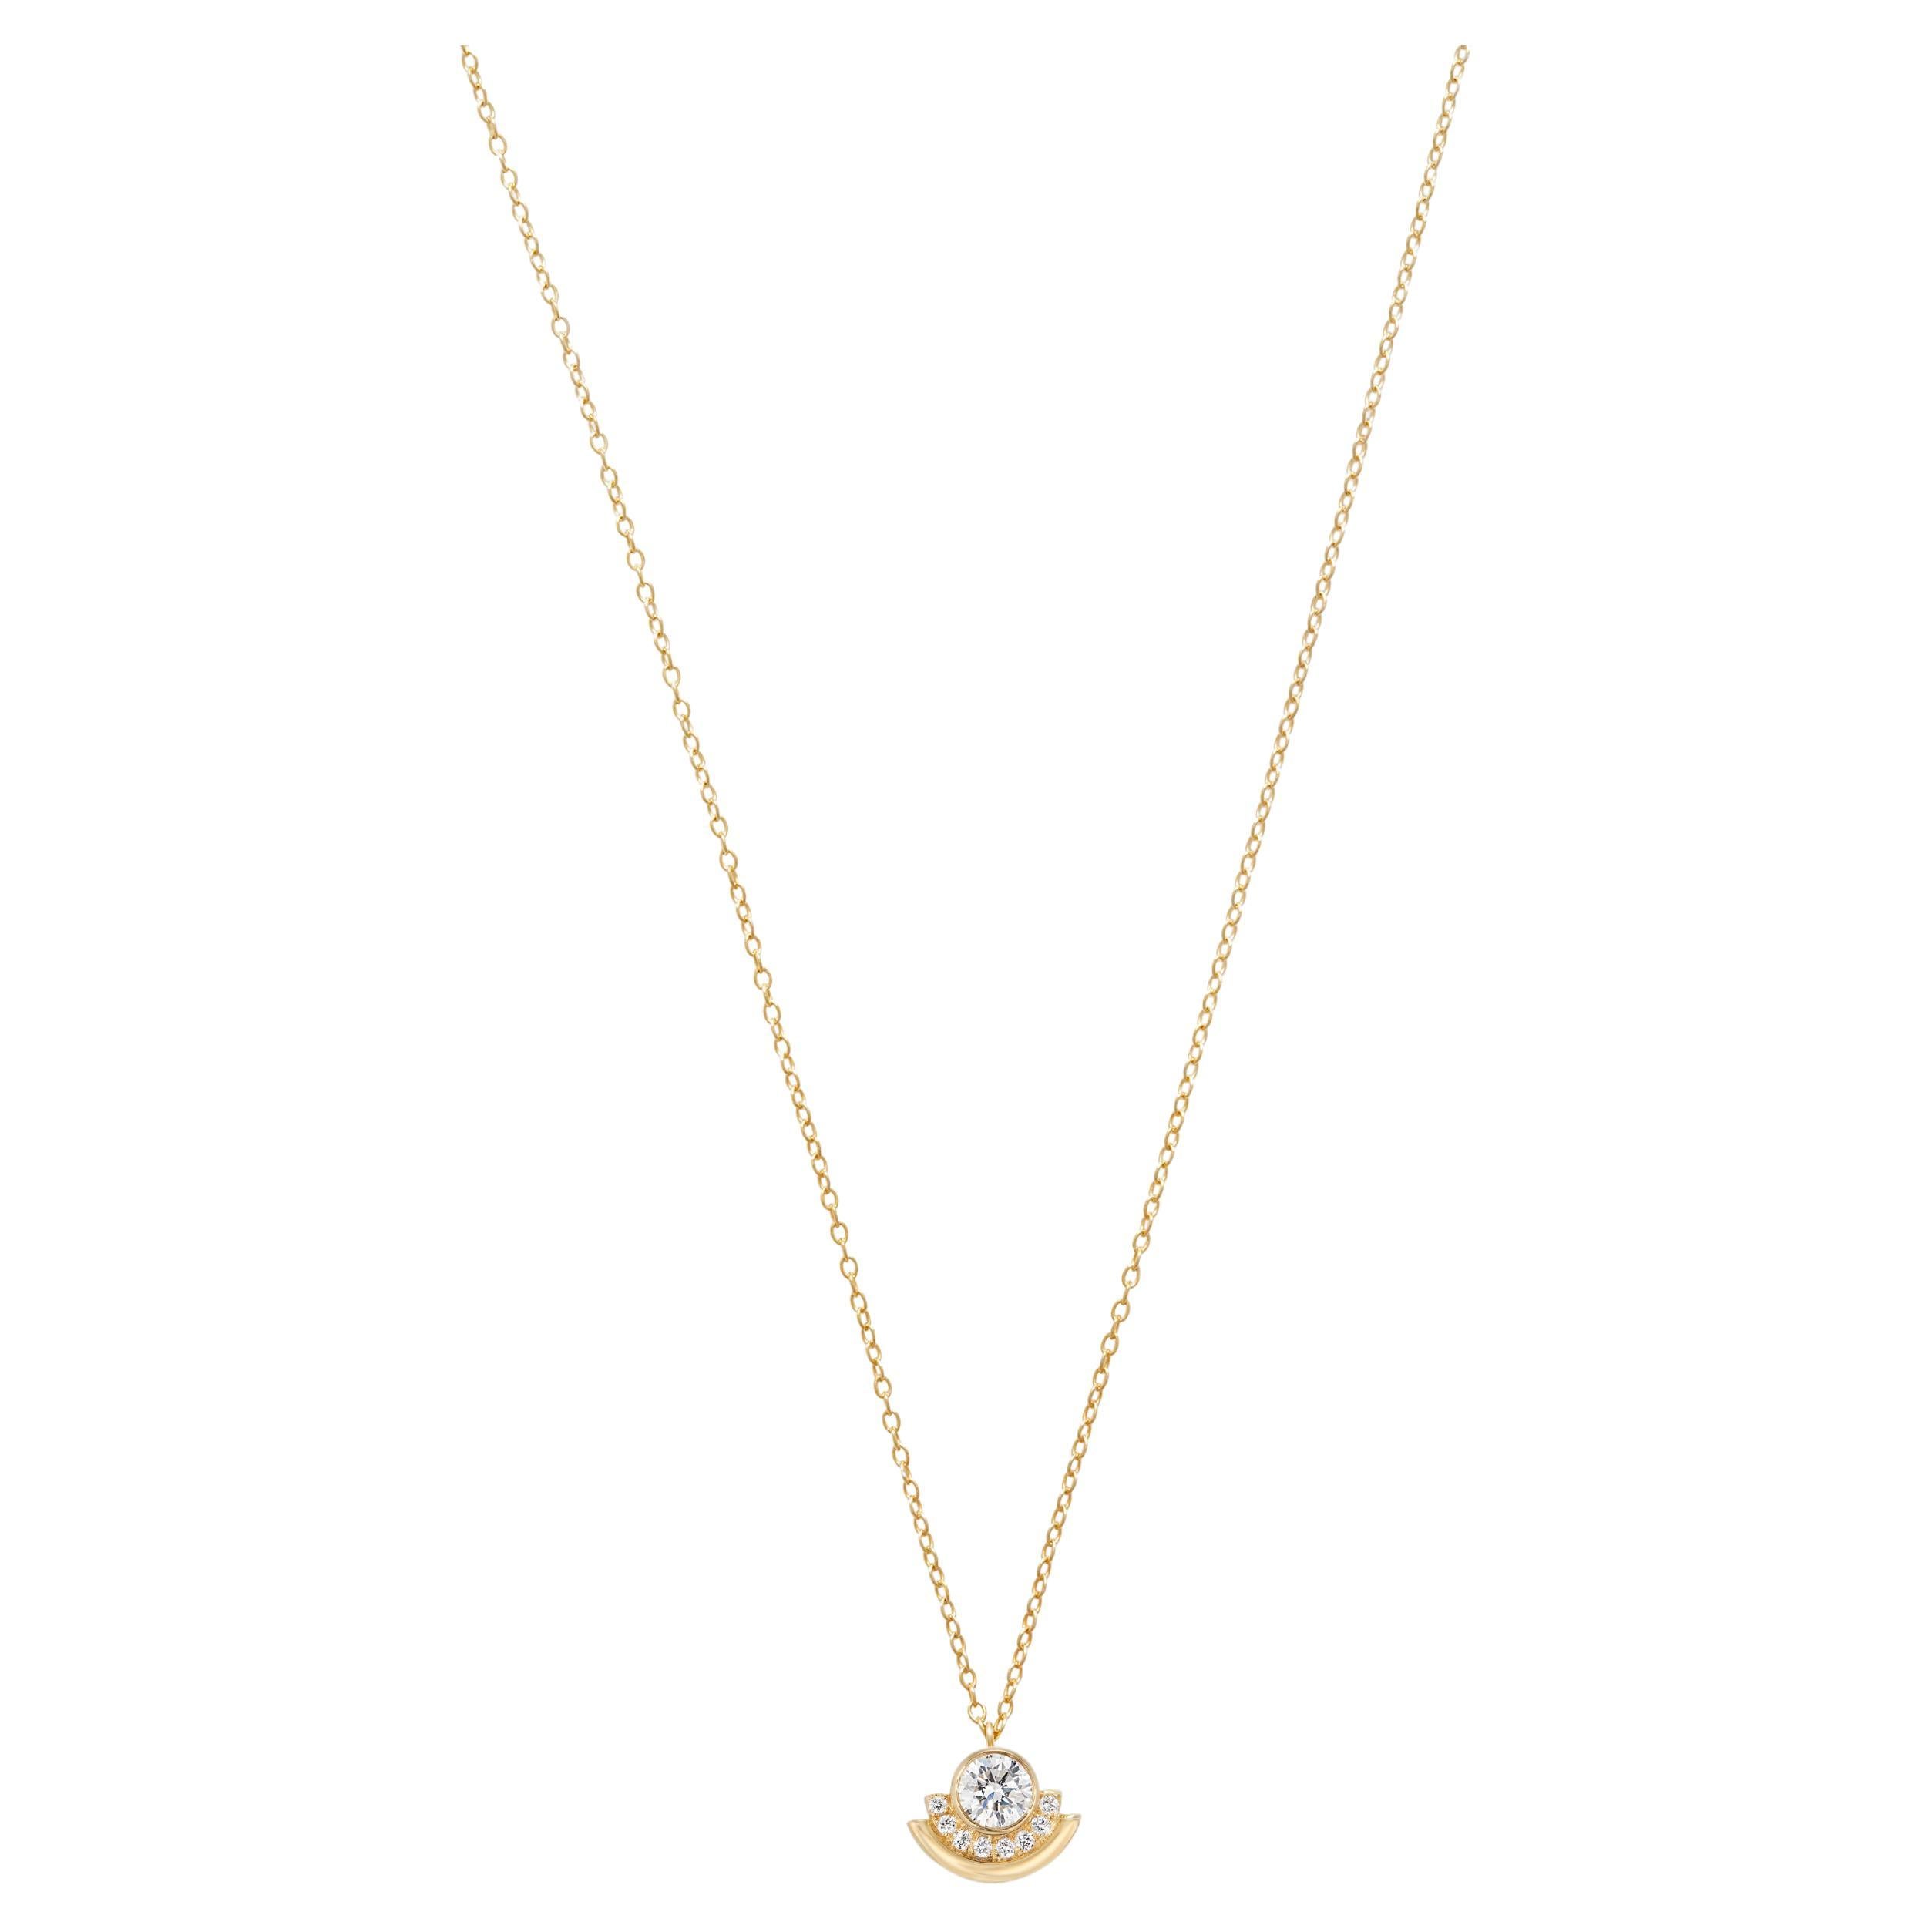 Casey Perez Gold Arc Necklace with .8 carats of Brilliant Cut Diamonds For Sale